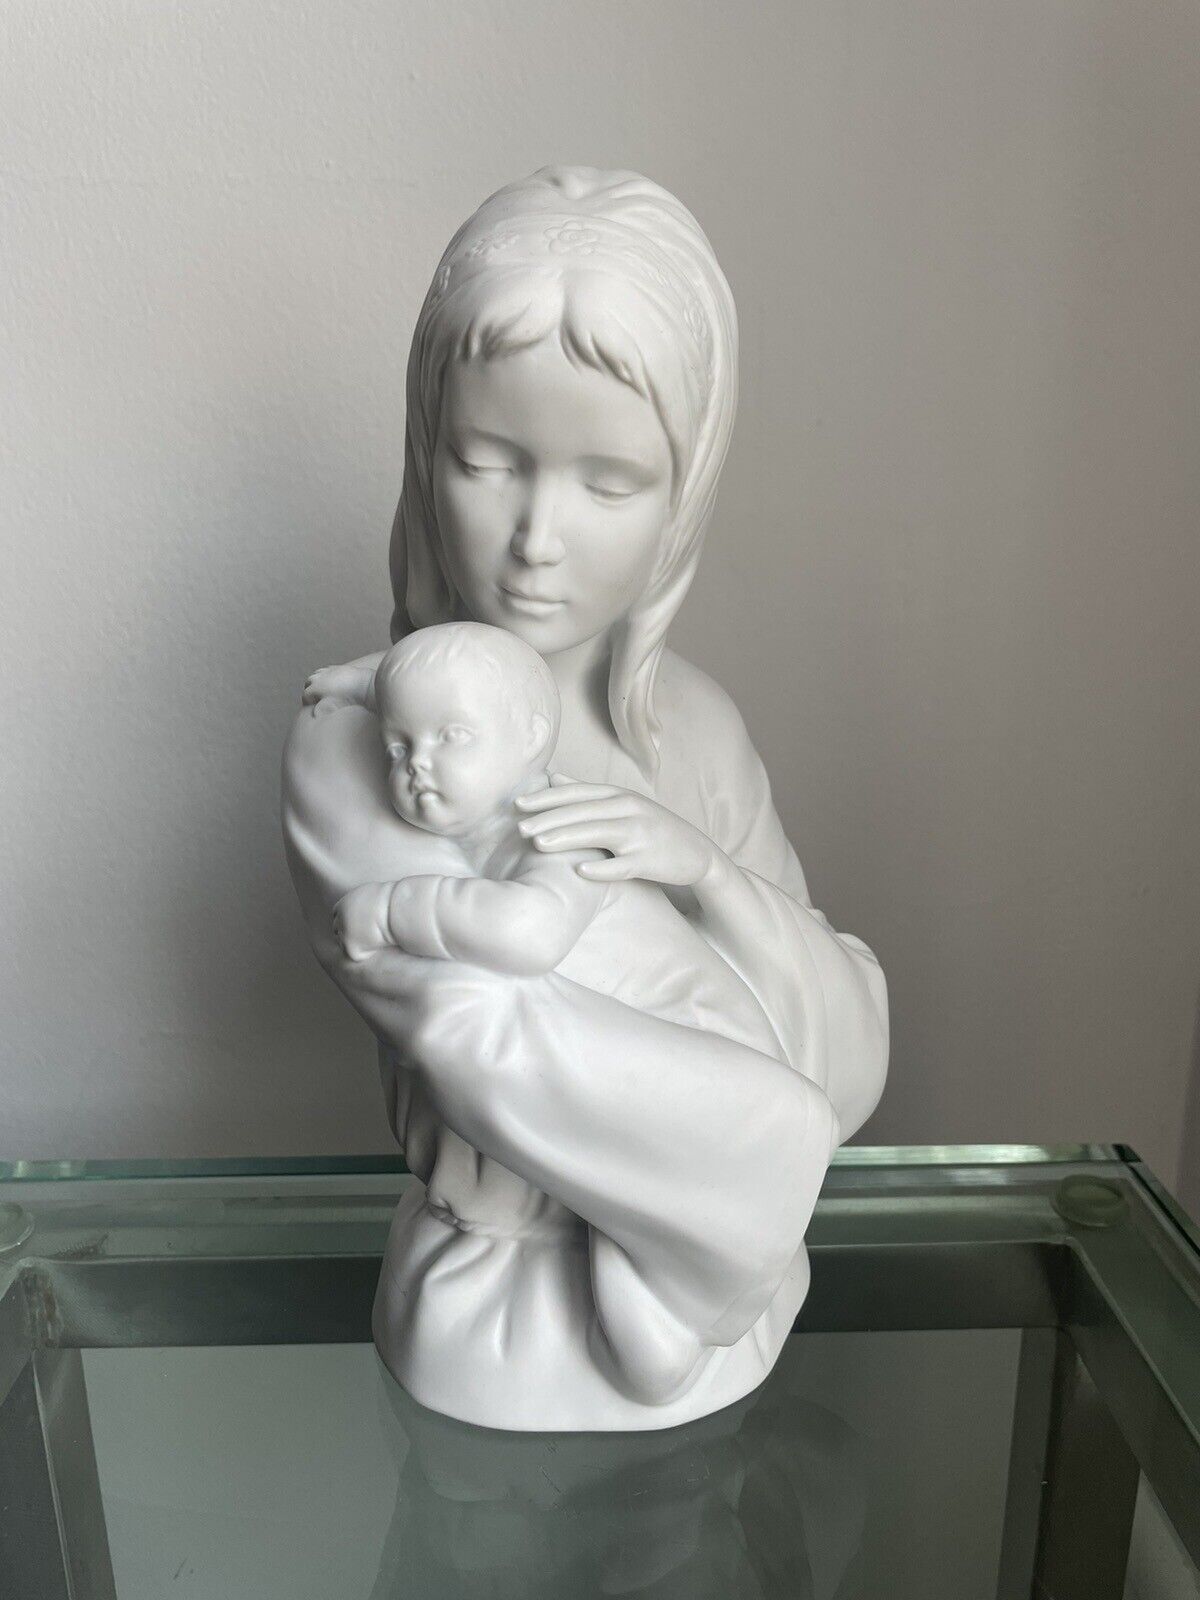 Kaiser Collectible Figurine “Mother Hugging Child”